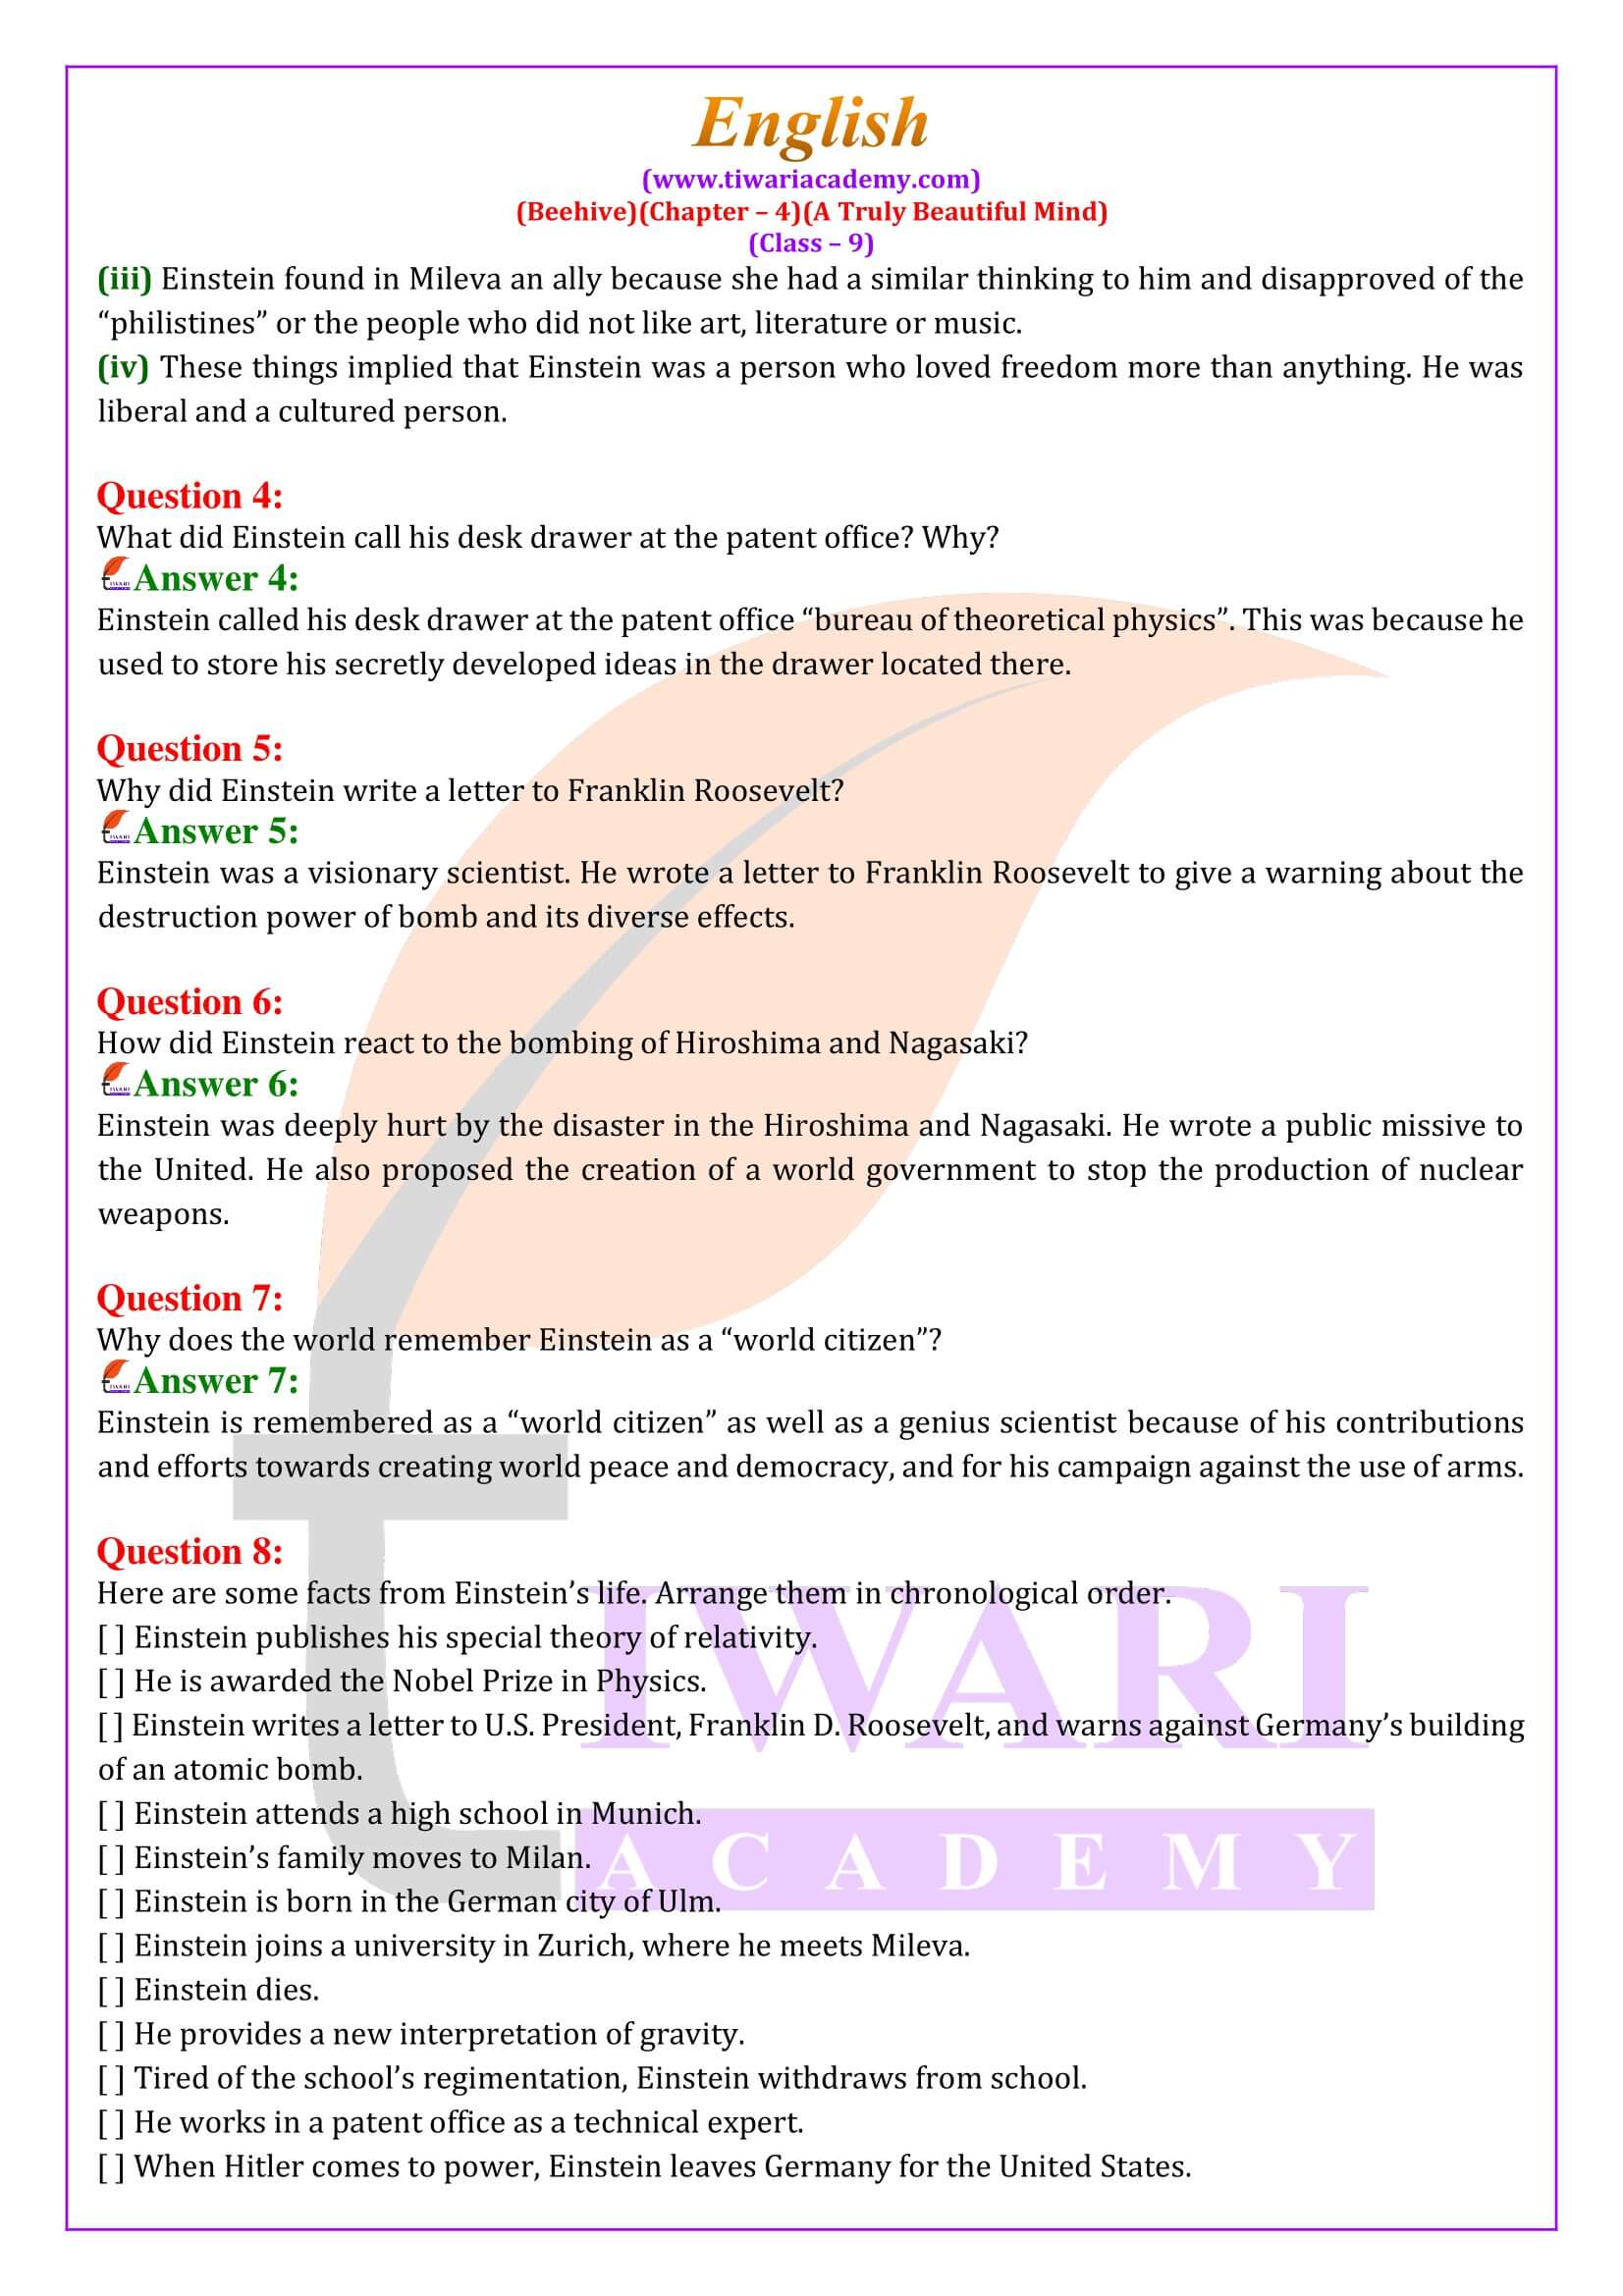 Class 9 English Beehive Chapter 4